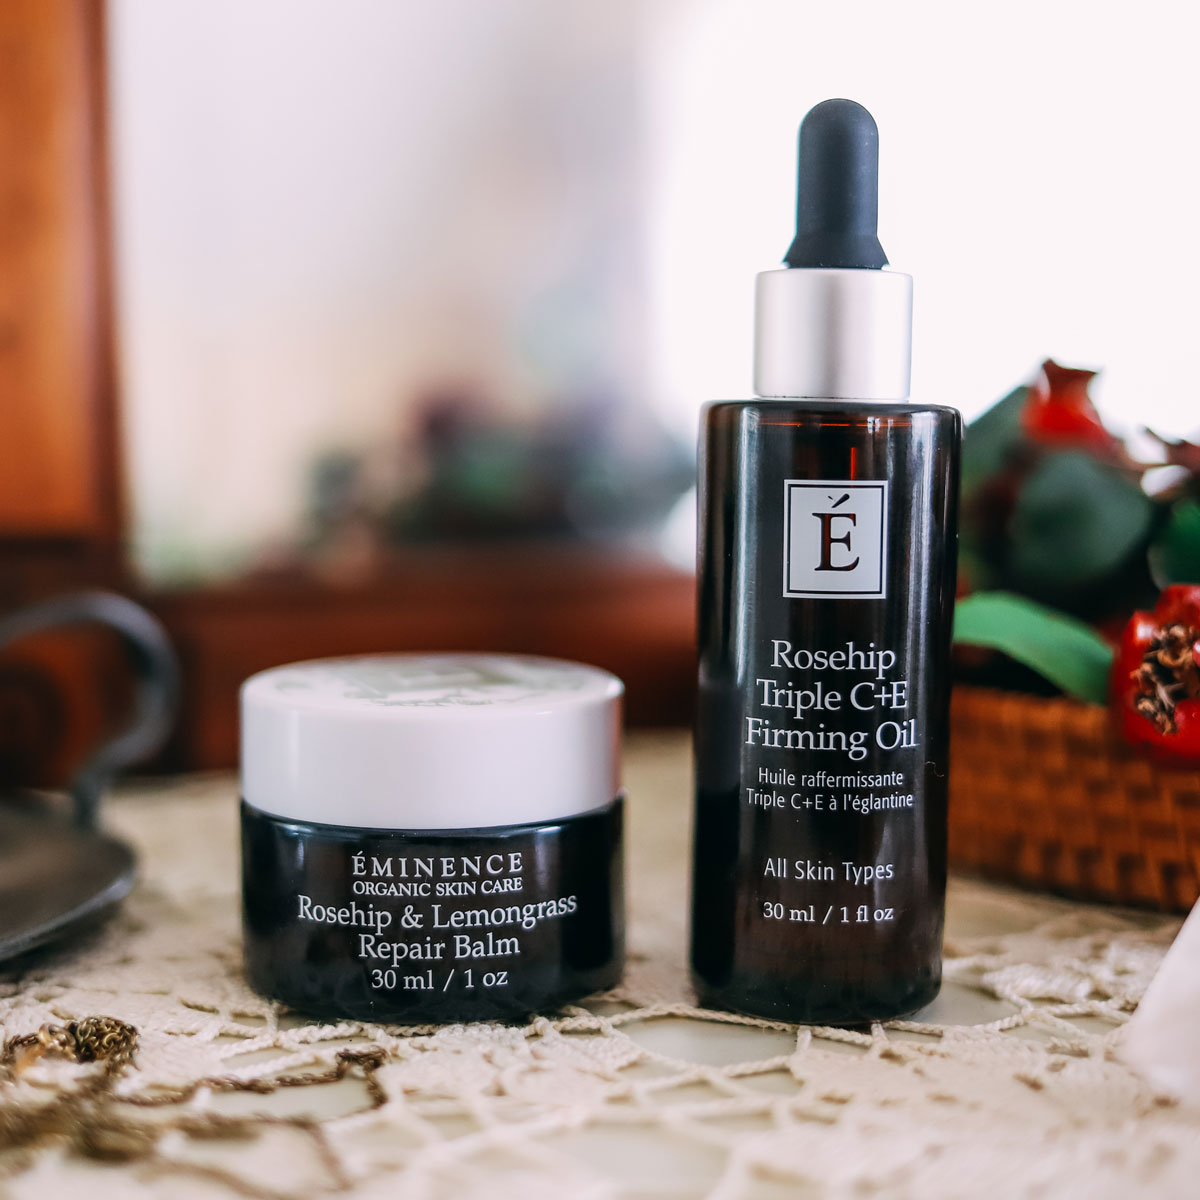 Repair and protect your skin from damage caused by UV, environmental stressors, and the aging process. Both products featured in this collection contain rosehip seed oil, which is high in essential fatty acids. Rosehip oil promotes skin elasticity and hydration, has an anti-inflammatory effect, supports wound healing, and slows signs of aging. In the evening, apply 2-3 drops of the Rosehip Triple C+E Firming Oil onto freshly cleansed skin. Penetrate using circular movements. Then, apply a pea size amount of the Rosehip & Lemongrass Repair Balm. This combination is perfect for restoring the skin barrier while you sleep. Read more about these products in our blog post All products are full size and bundled together for a savings of $27.